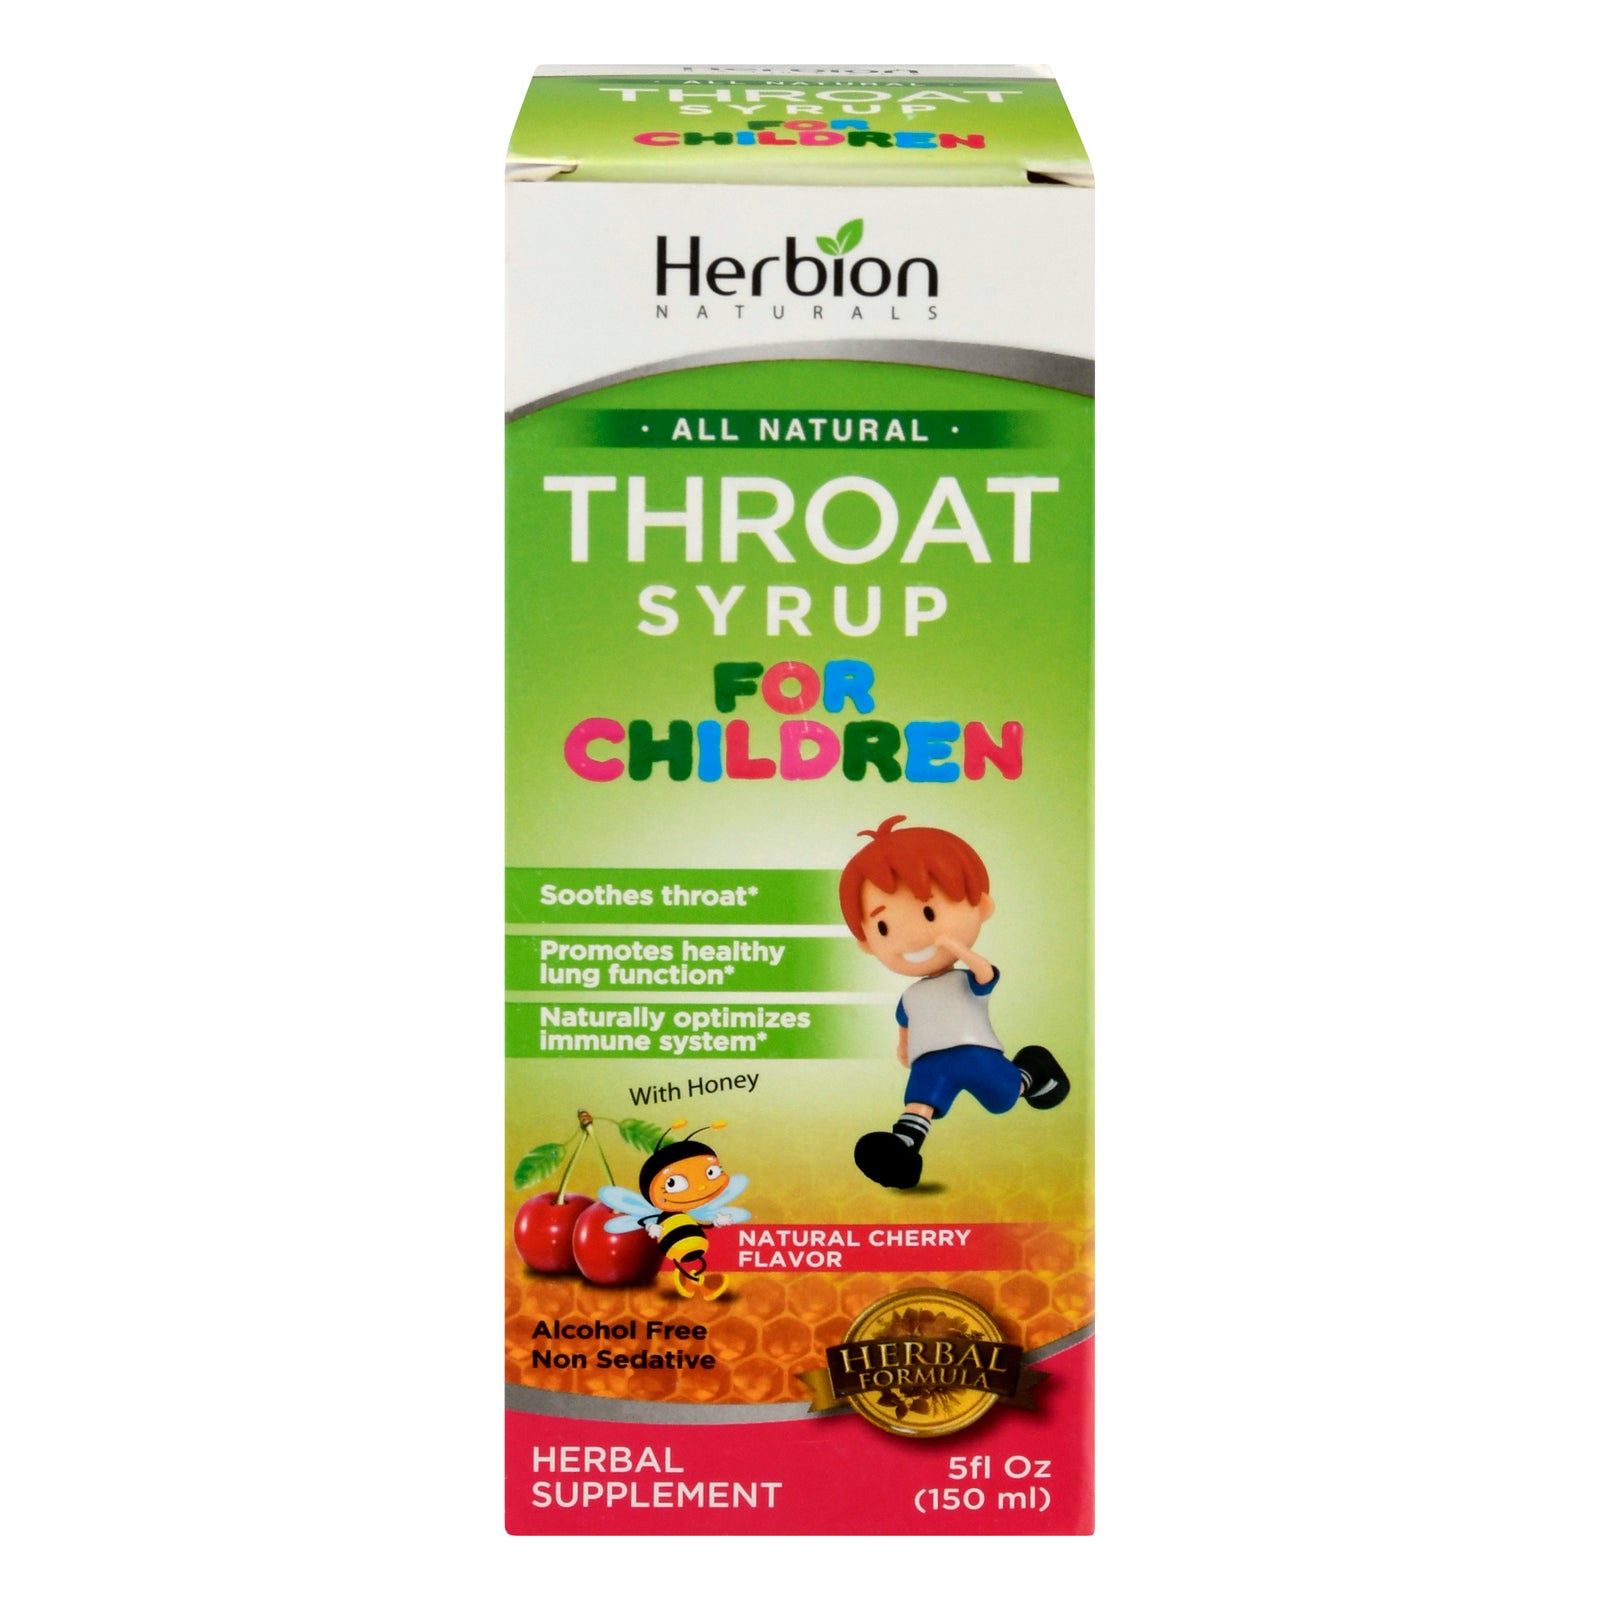 Herbion Naturals Throat Syrup - All Natural - Cherry - For Children - 5 Oz